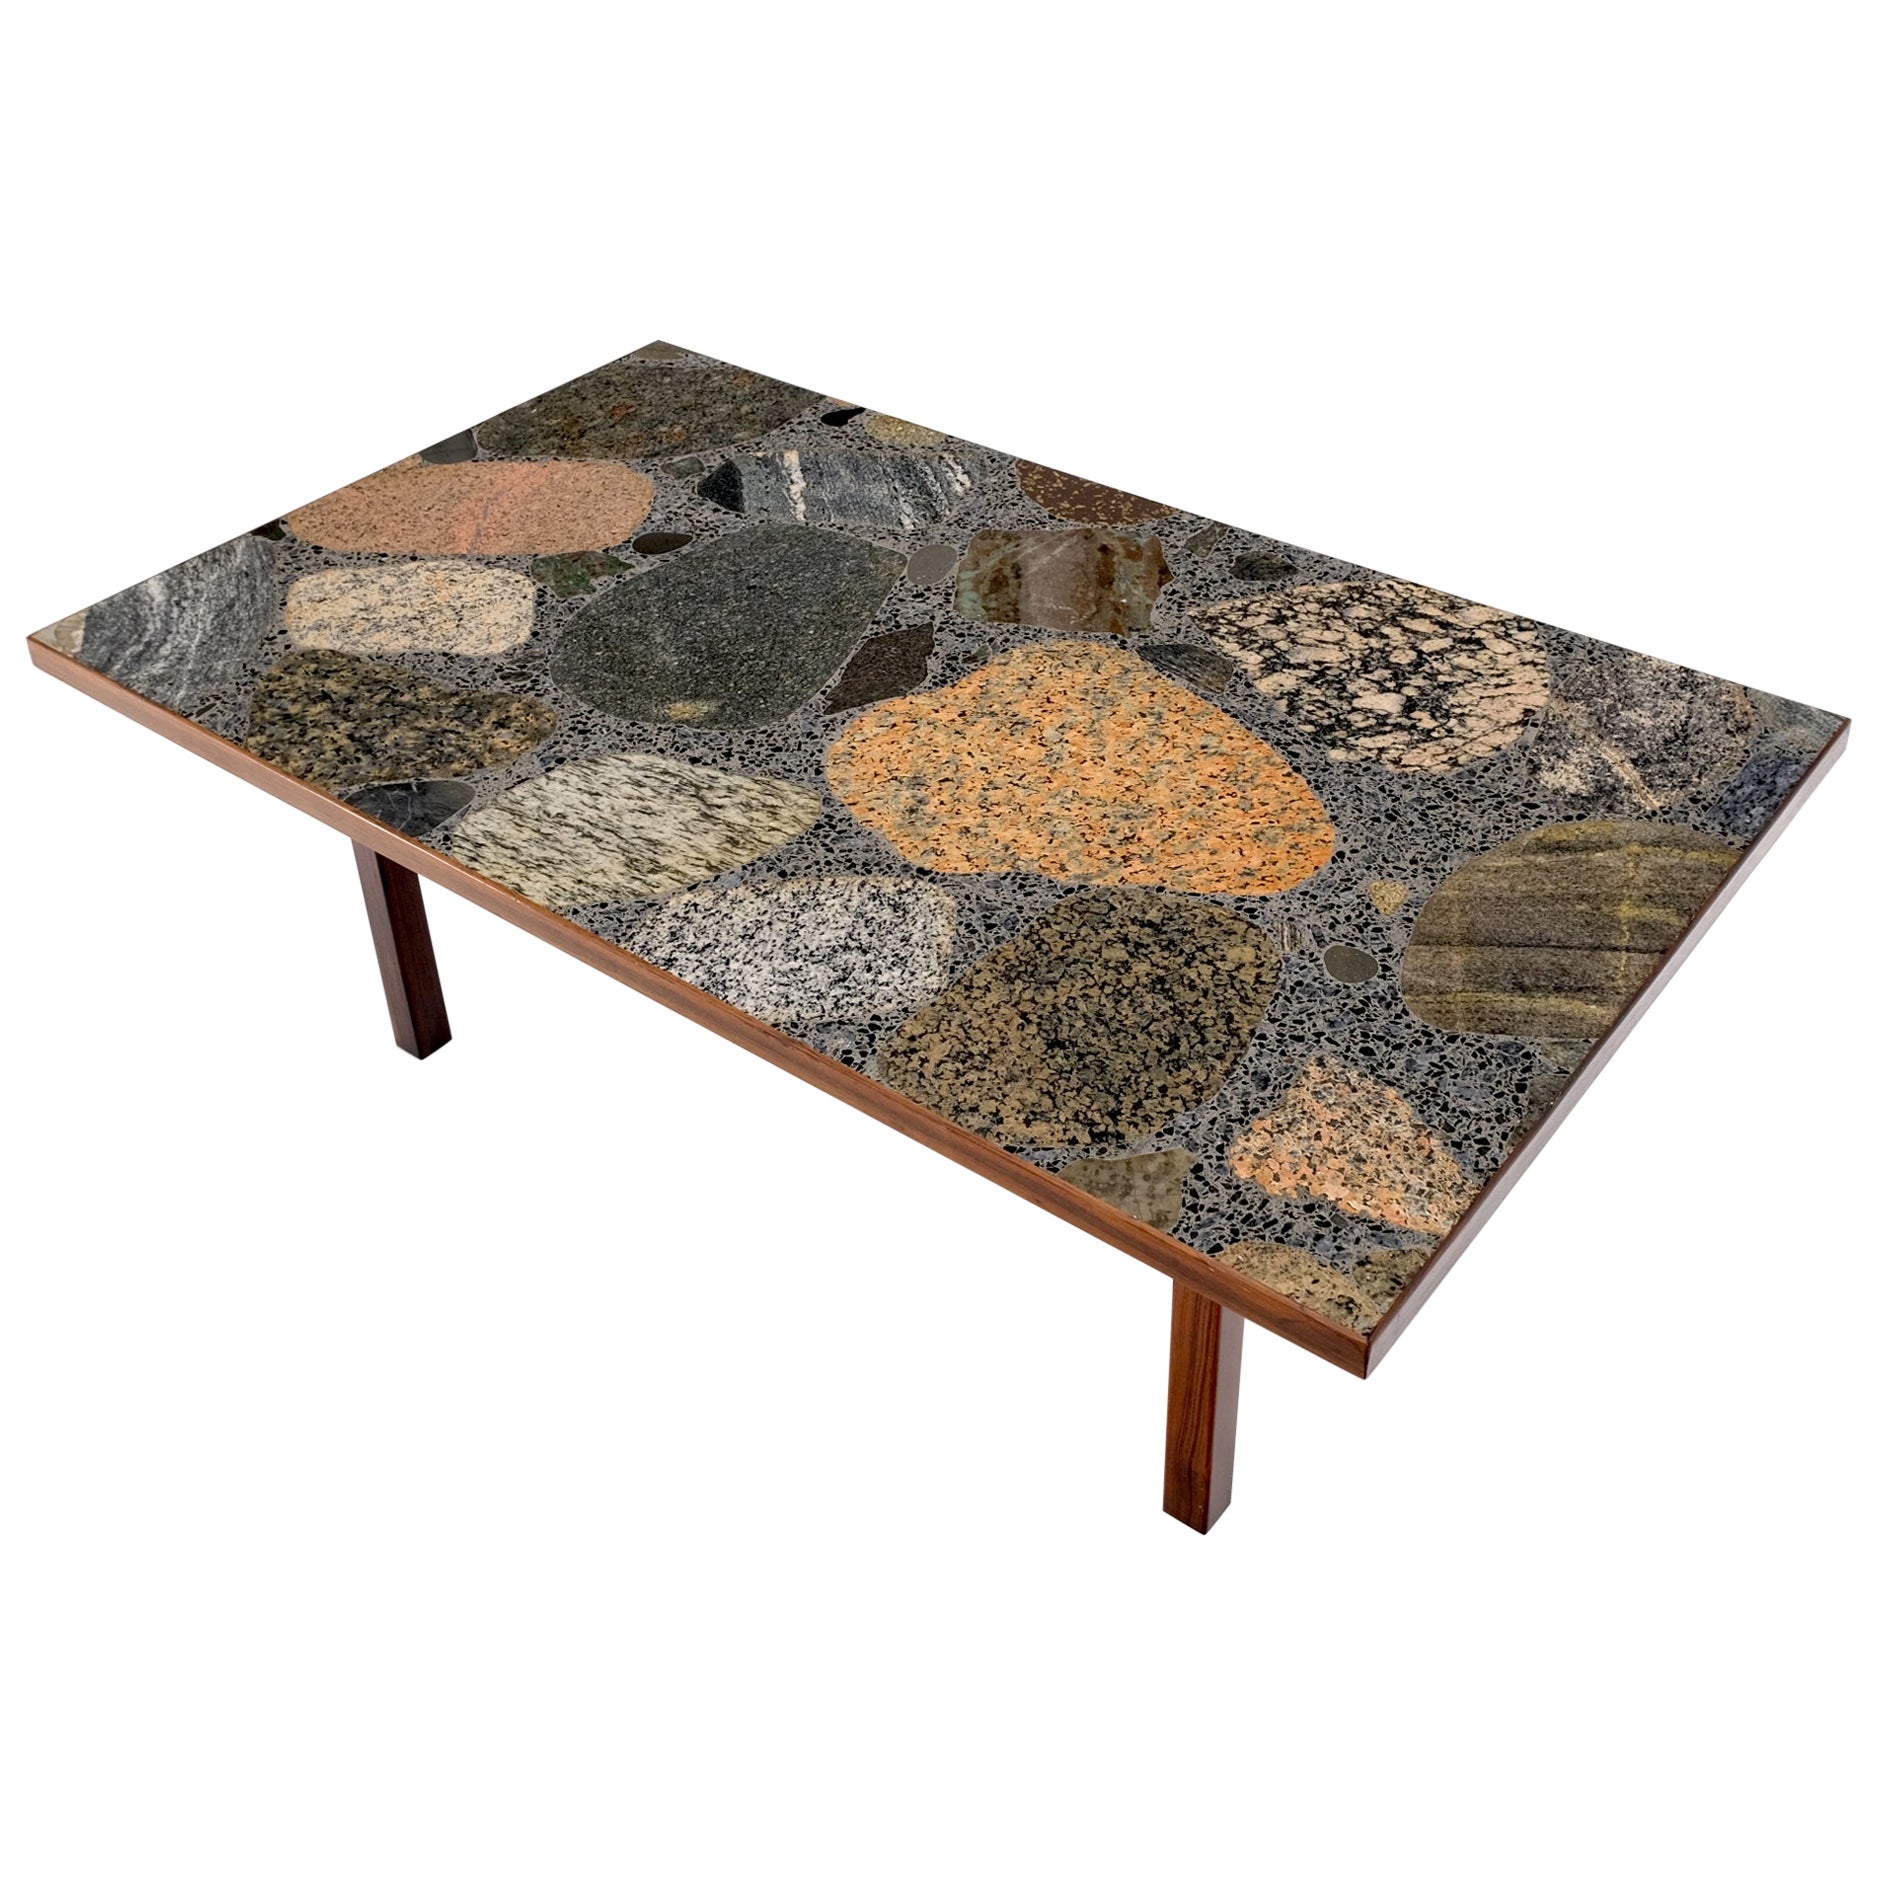 Solid Rosewood Base Terrazzo Granite Top Rectangle Danish Modern Coffee Table For Sale